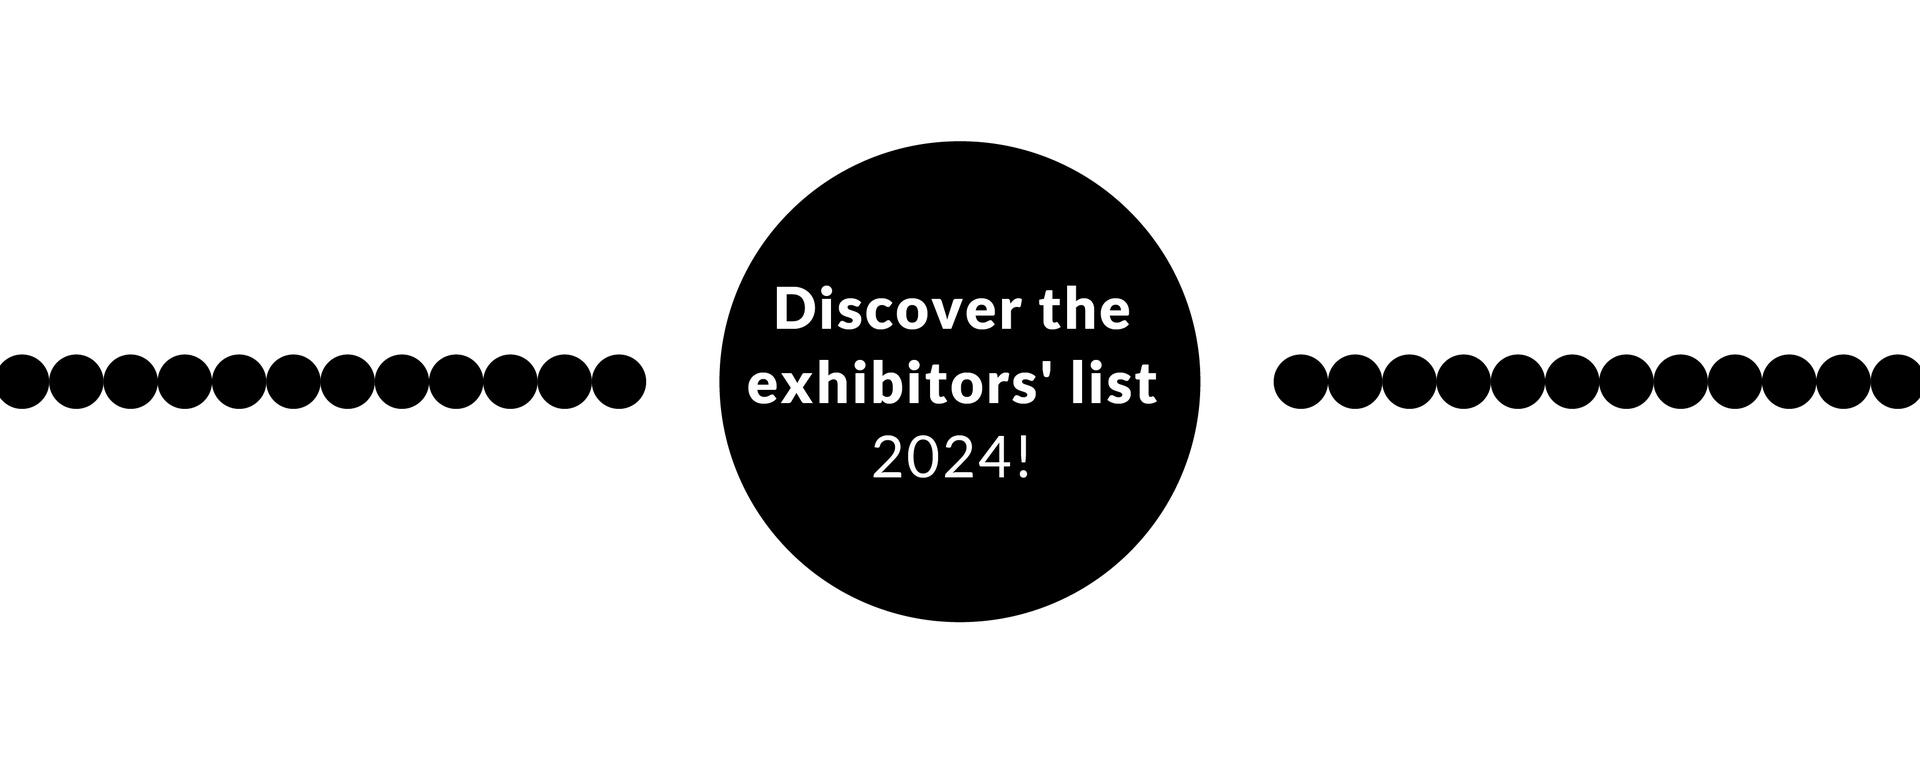 Discover the exhibitors' list 2024!